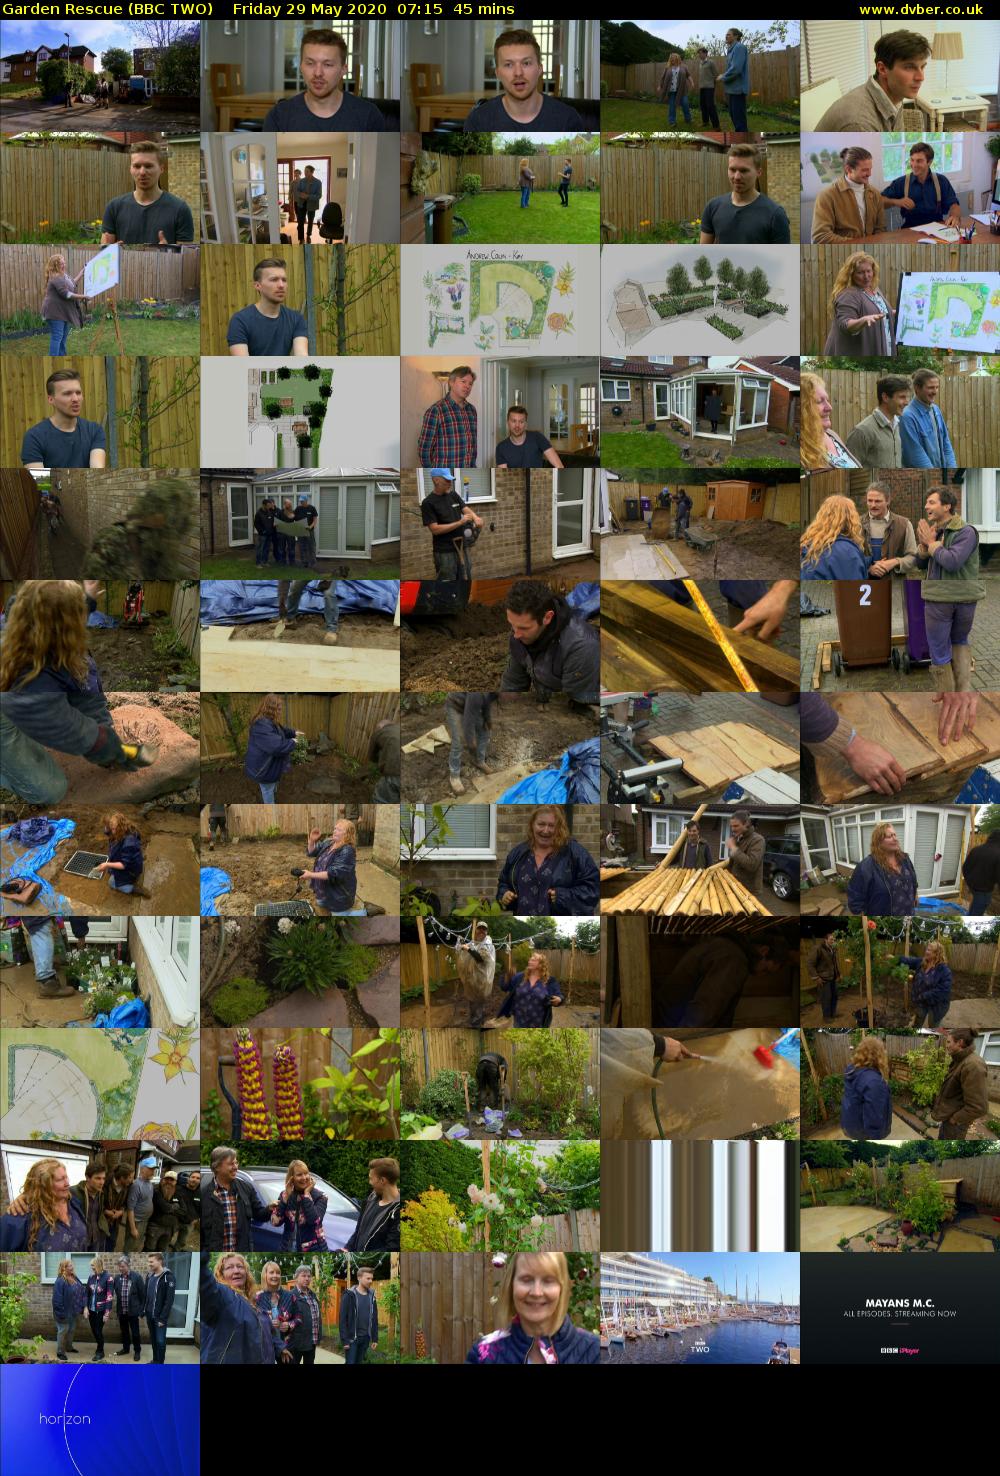 Garden Rescue (BBC TWO) Friday 29 May 2020 07:15 - 08:00